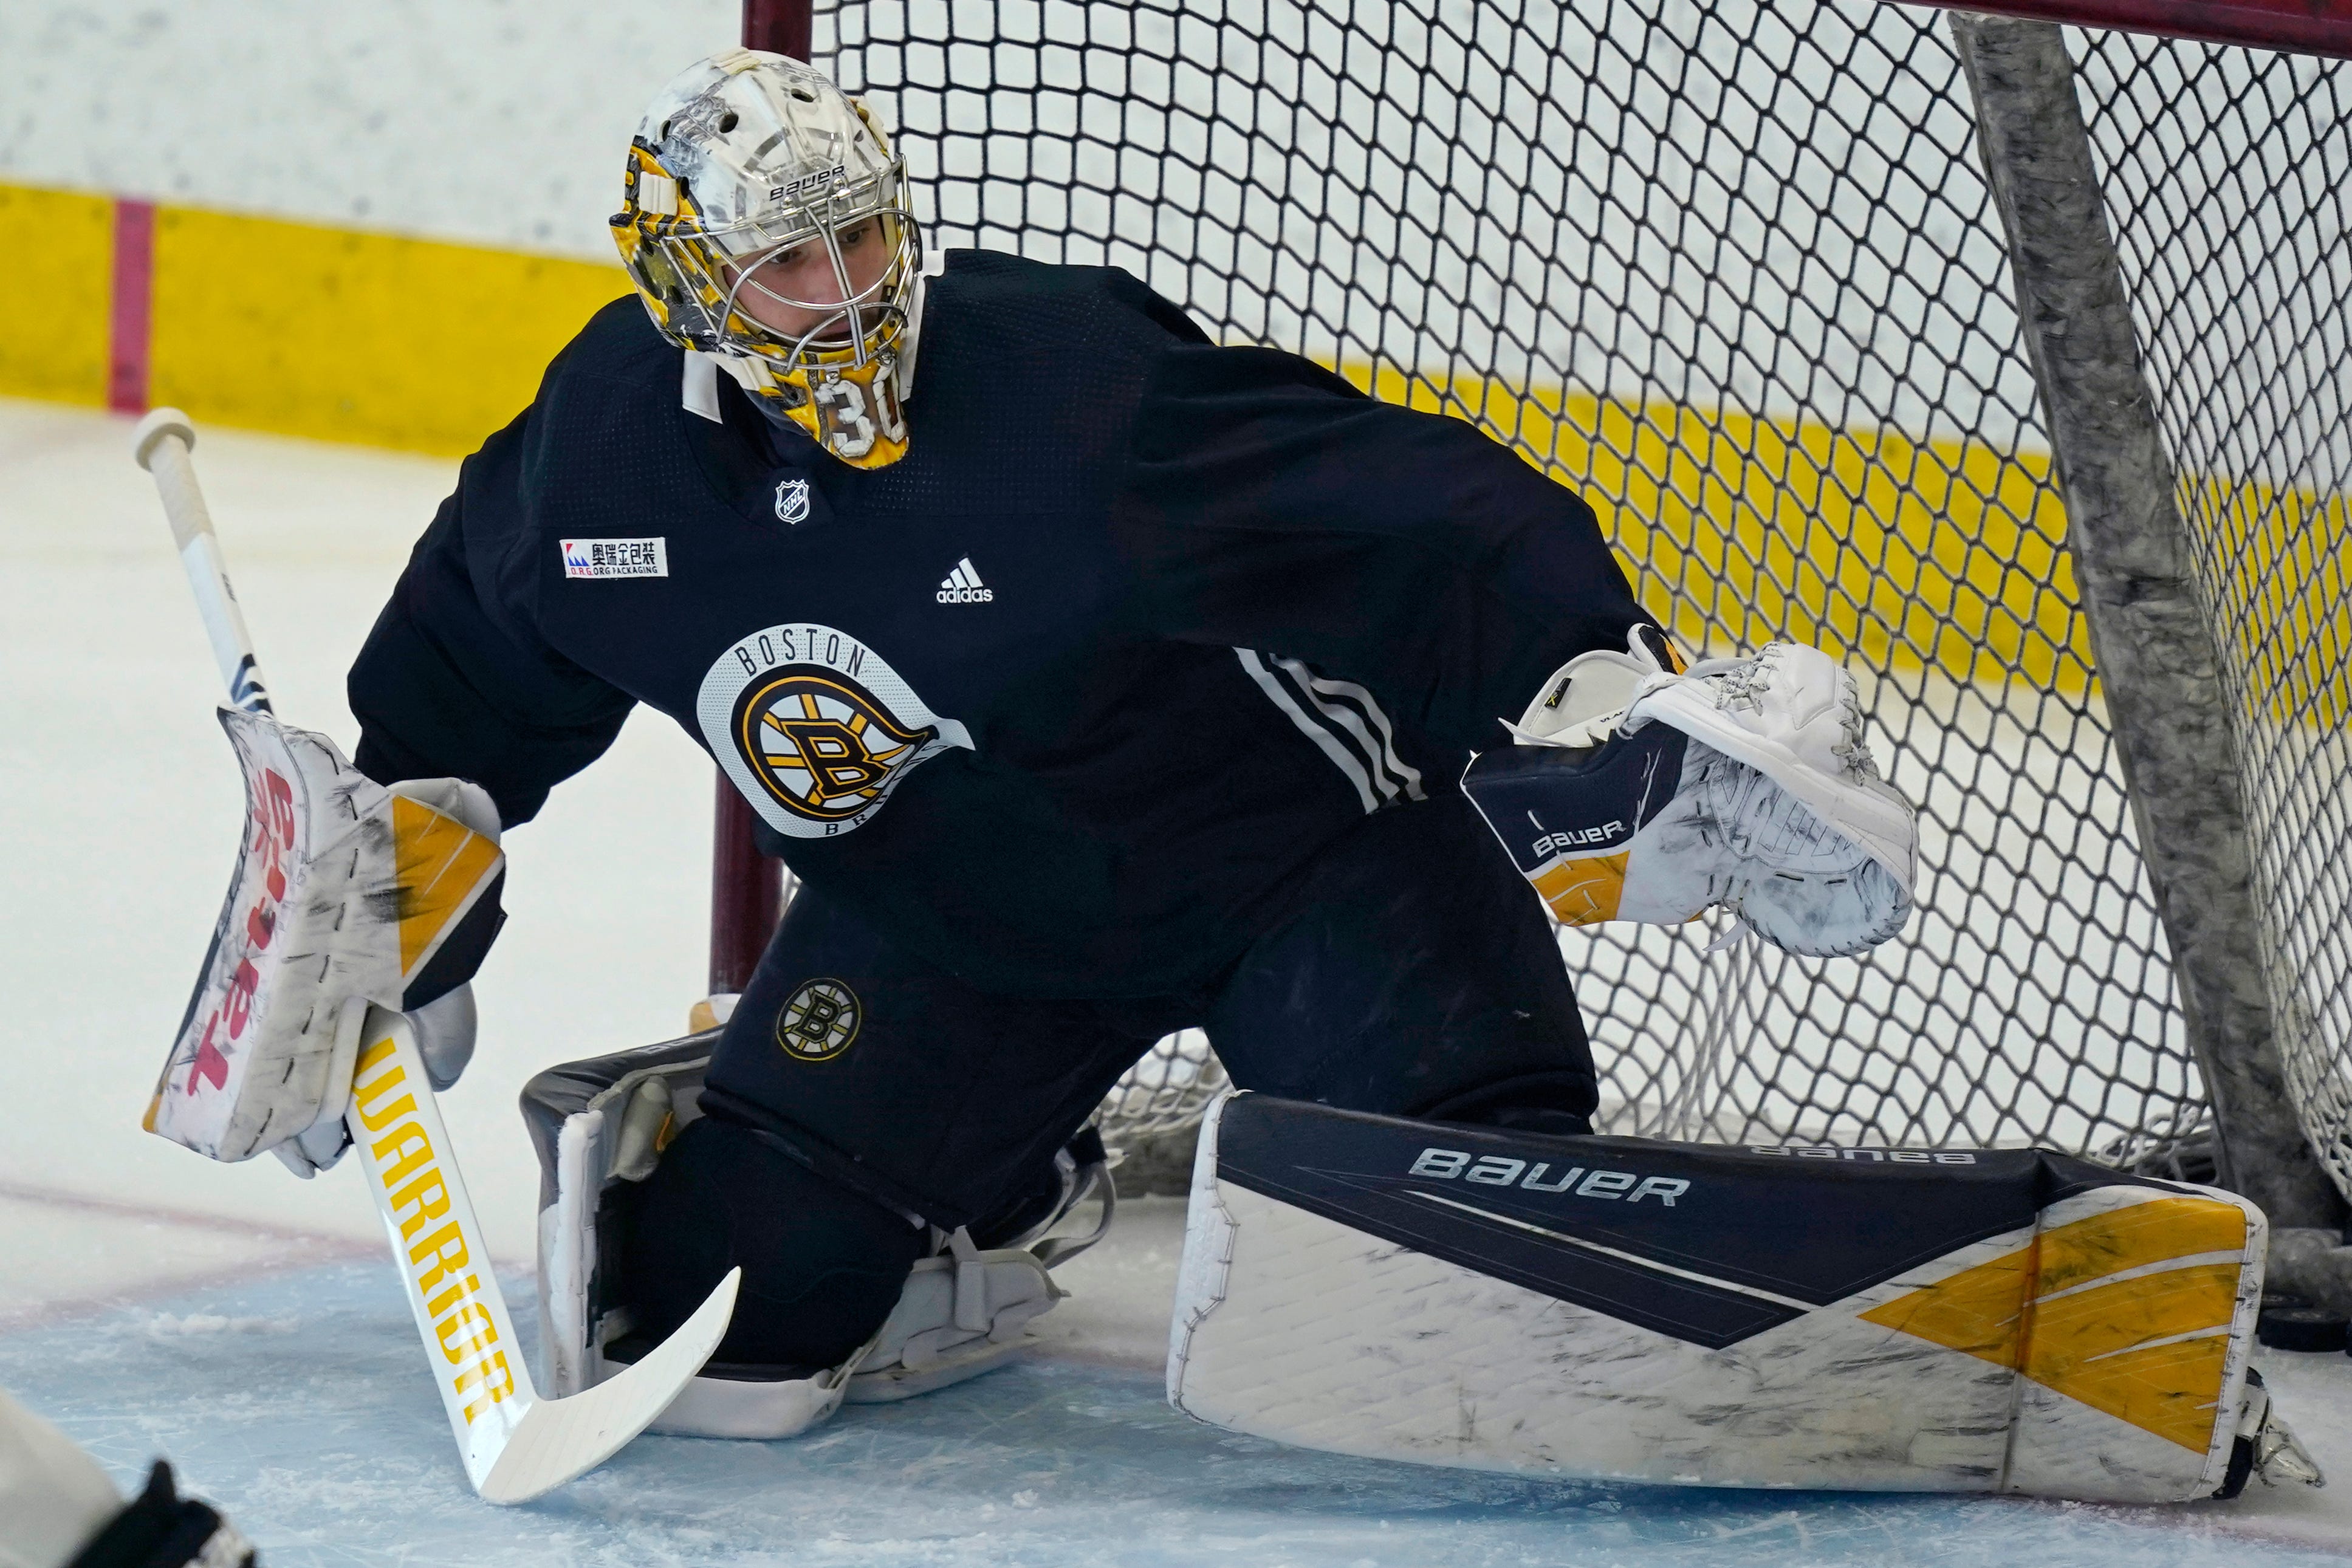 Future in net bright for Bruins with goalie prospects Vladar, Swayman